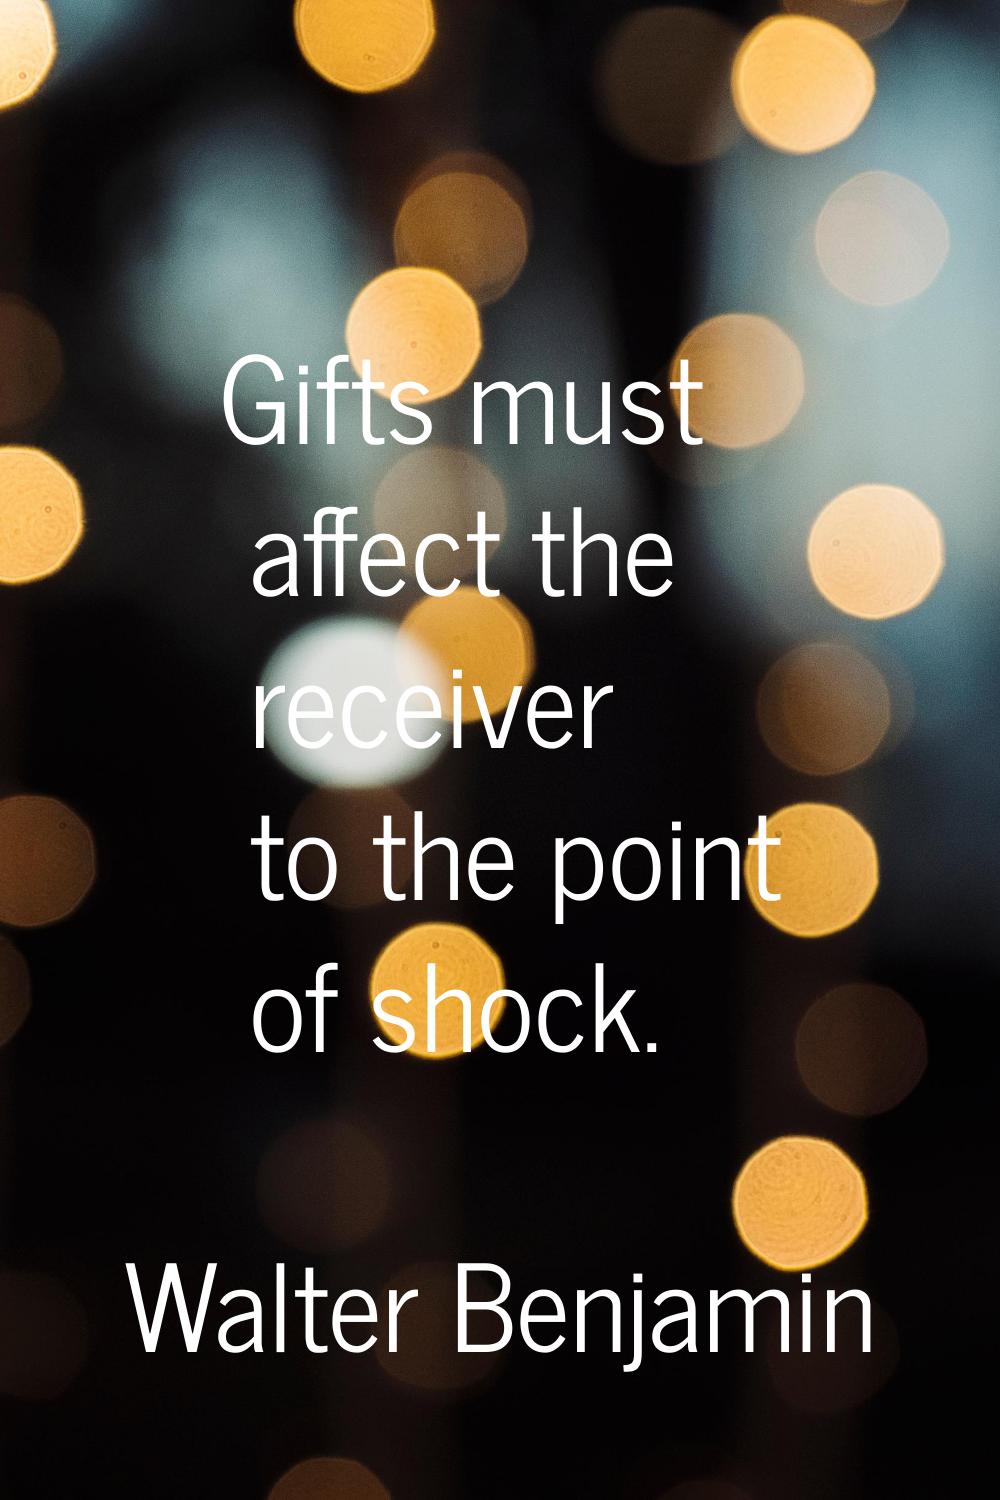 Gifts must affect the receiver to the point of shock.